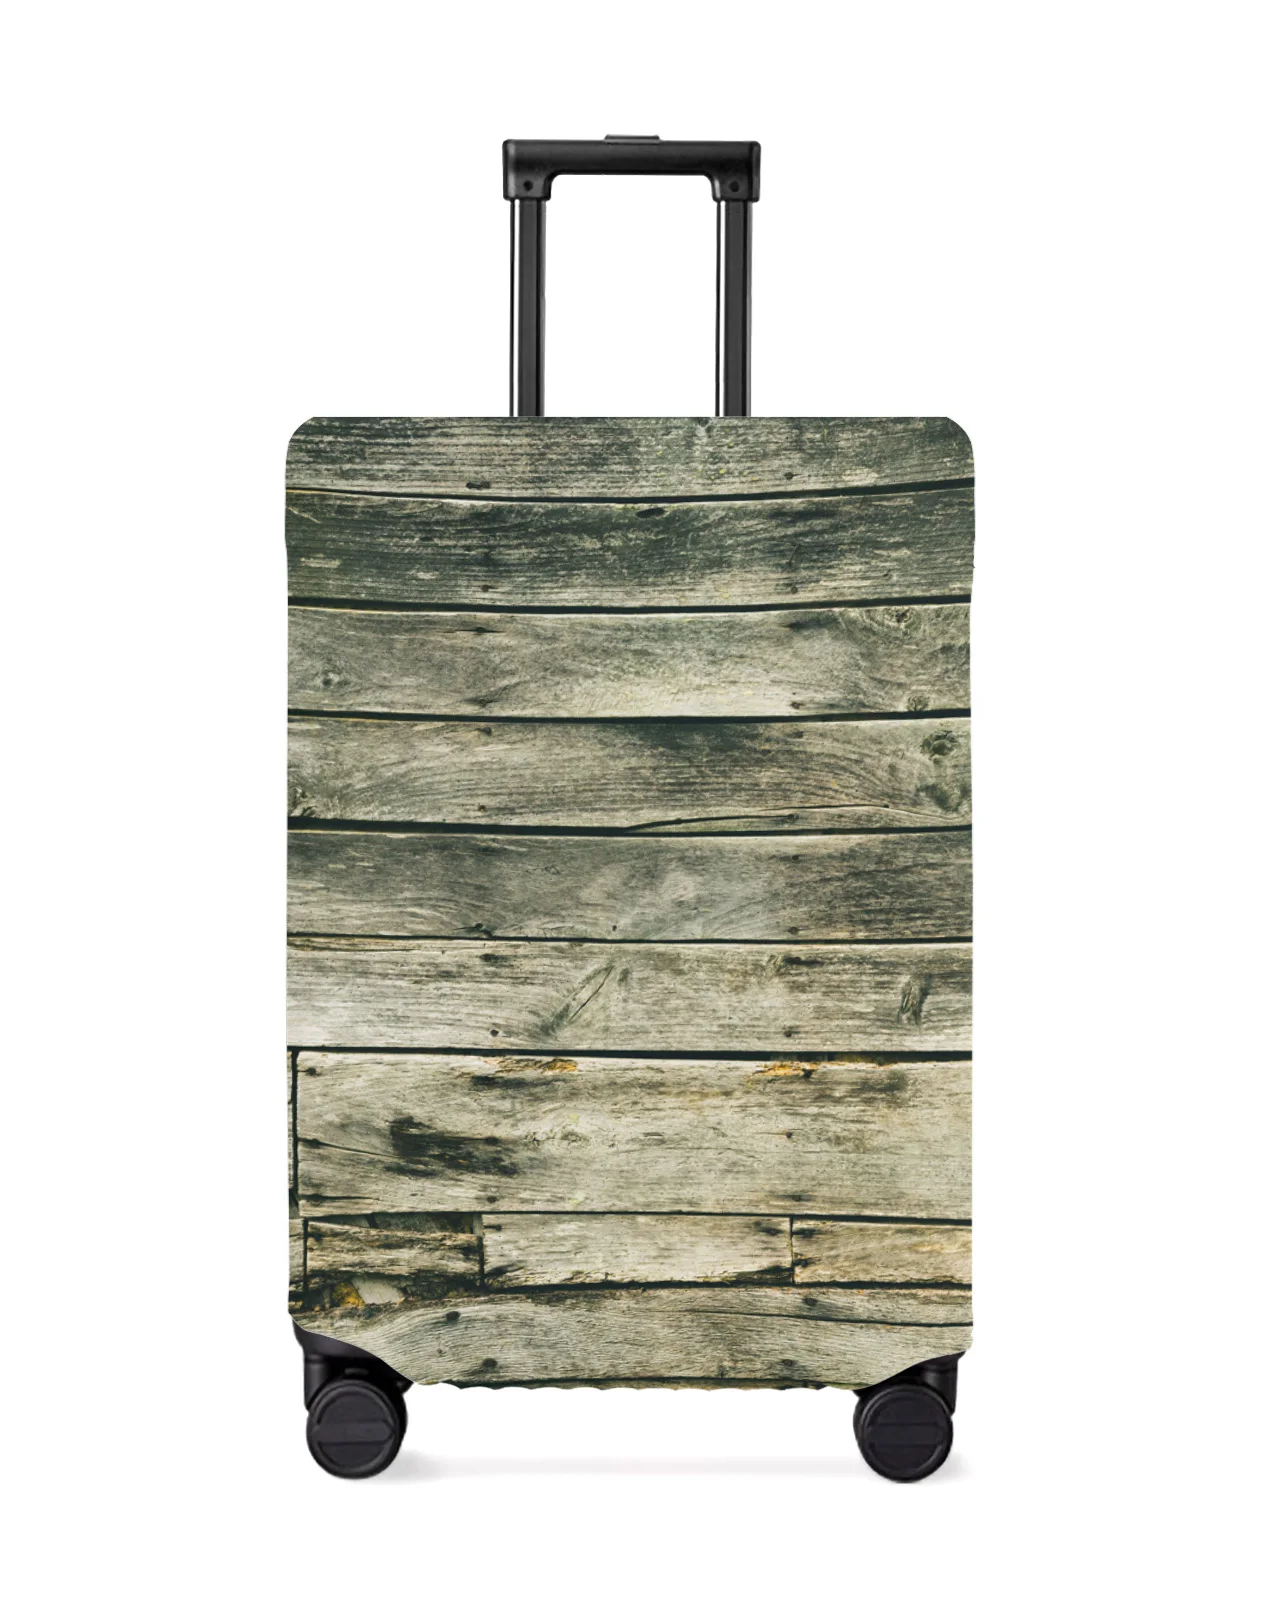 

Wood Grain Retro Travel Luggage Cover Elastic Baggage Cover Suitable For 18-32 Inch Suitcase Case Dust Cover Travel Accessories